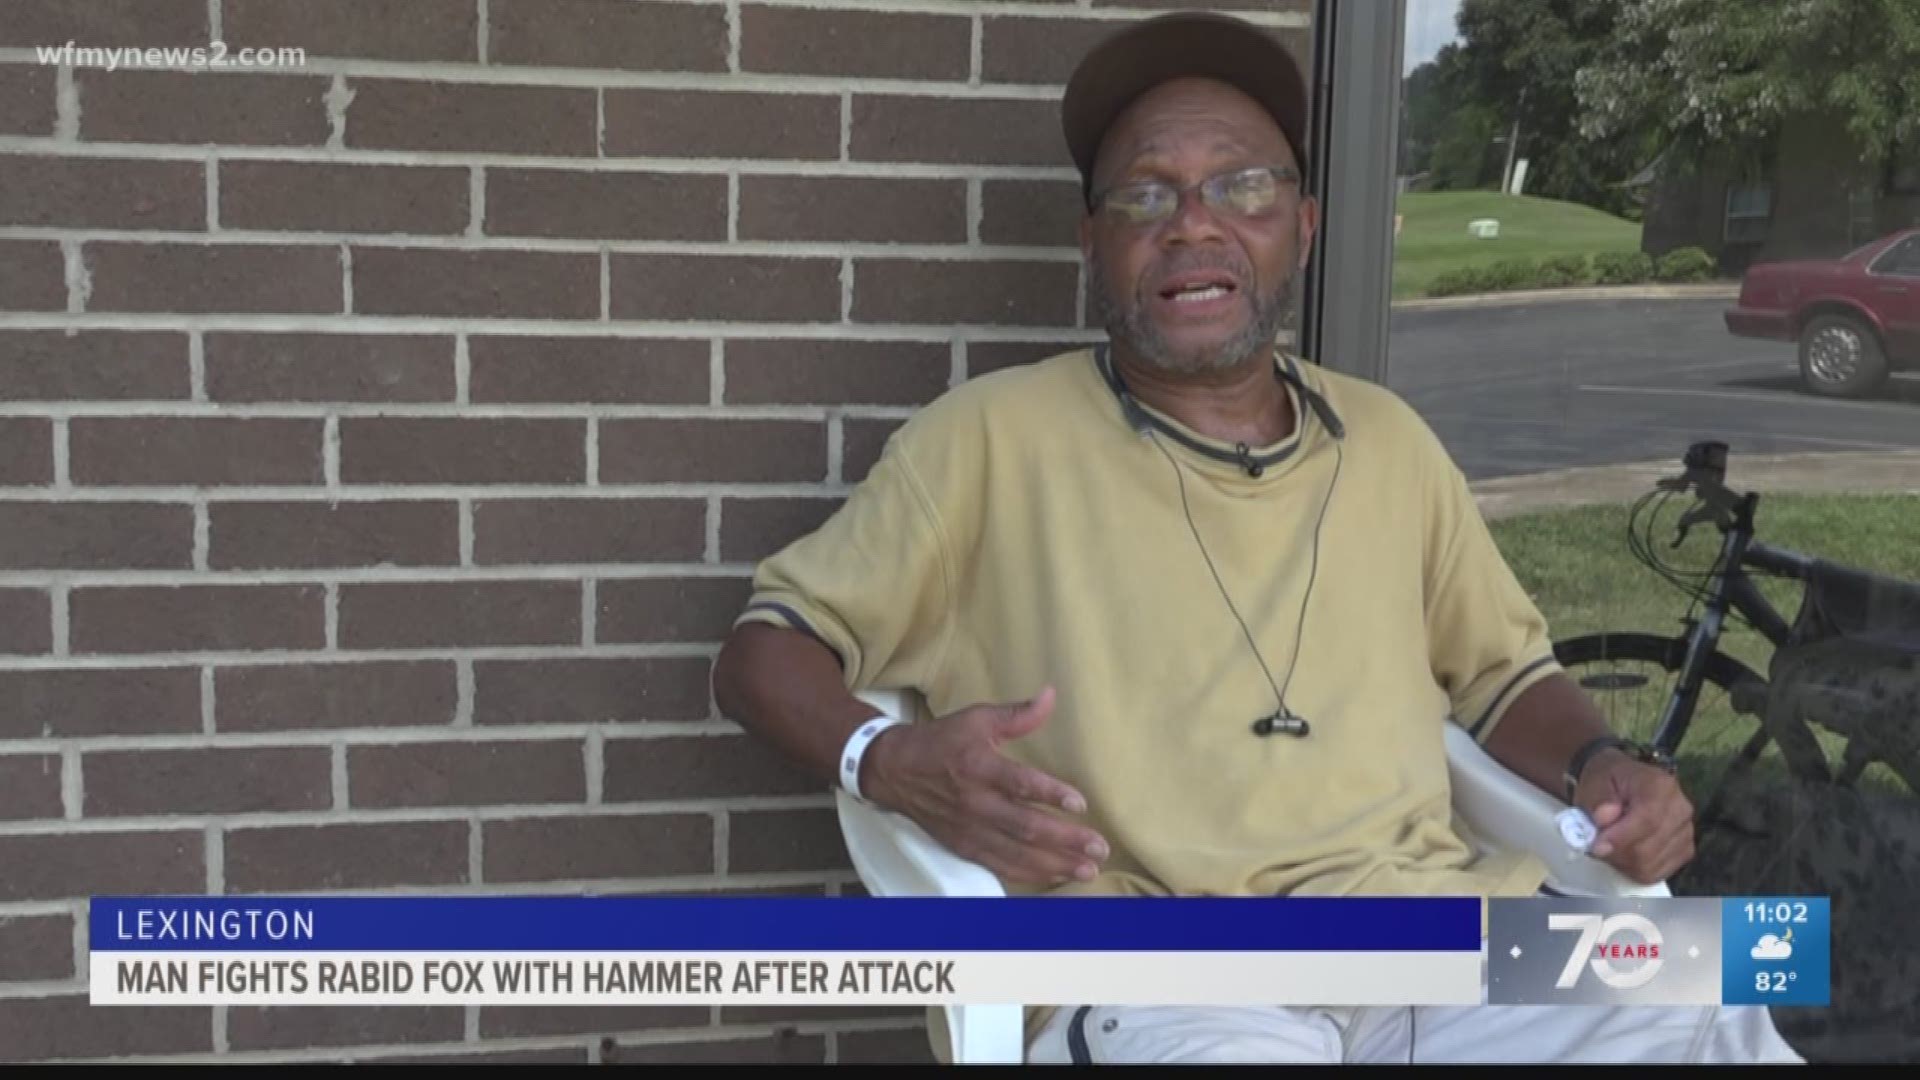 The Lexington man had to kill the fox with a hammer after it attacked him earlier this week